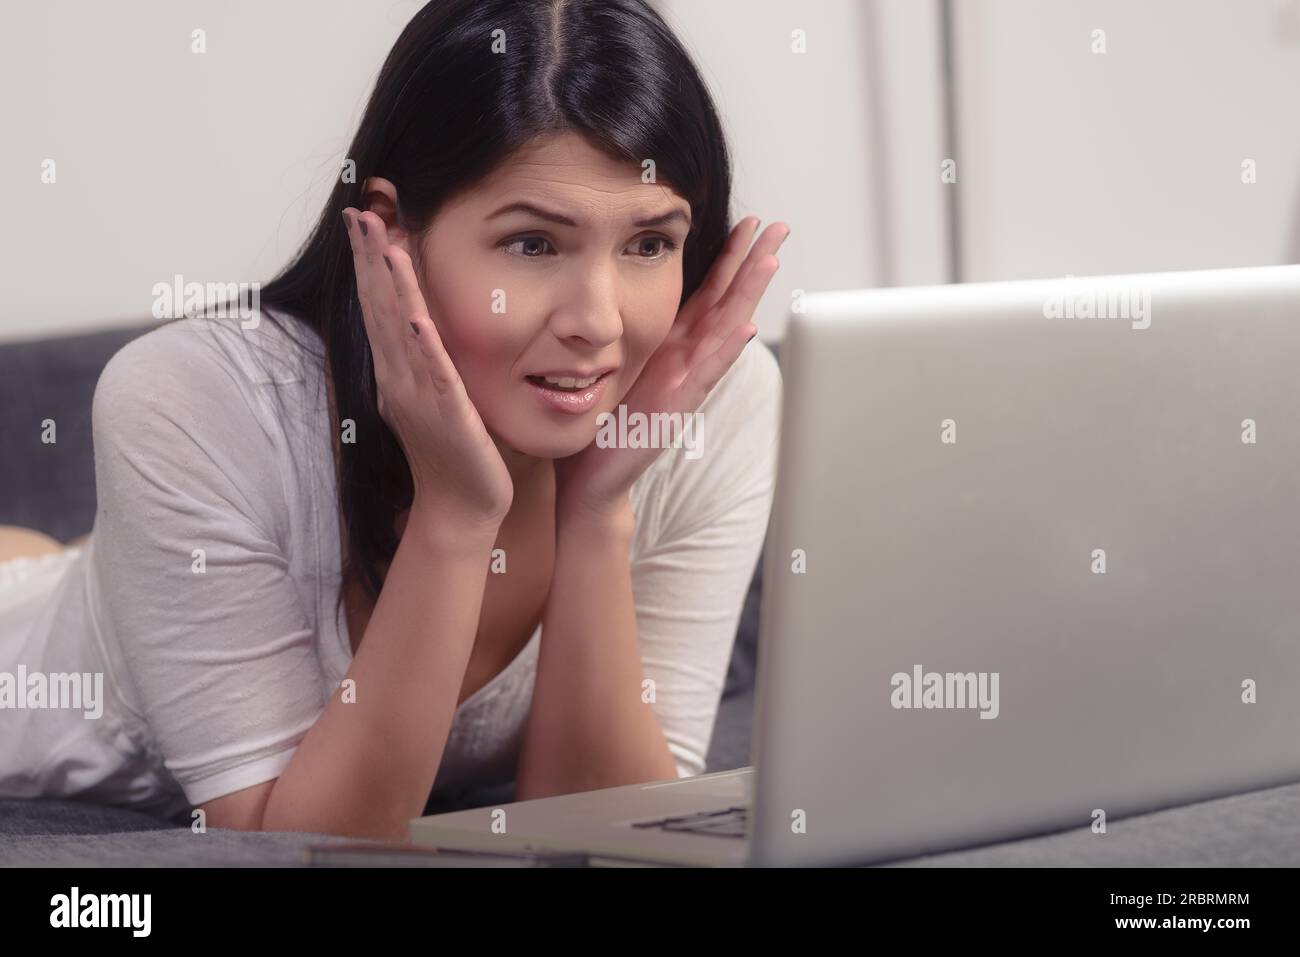 Beautiful young woman looking at her laptop computer with a horrified expression and her hands cupping her face as she reads something upsetting on Stock Photo